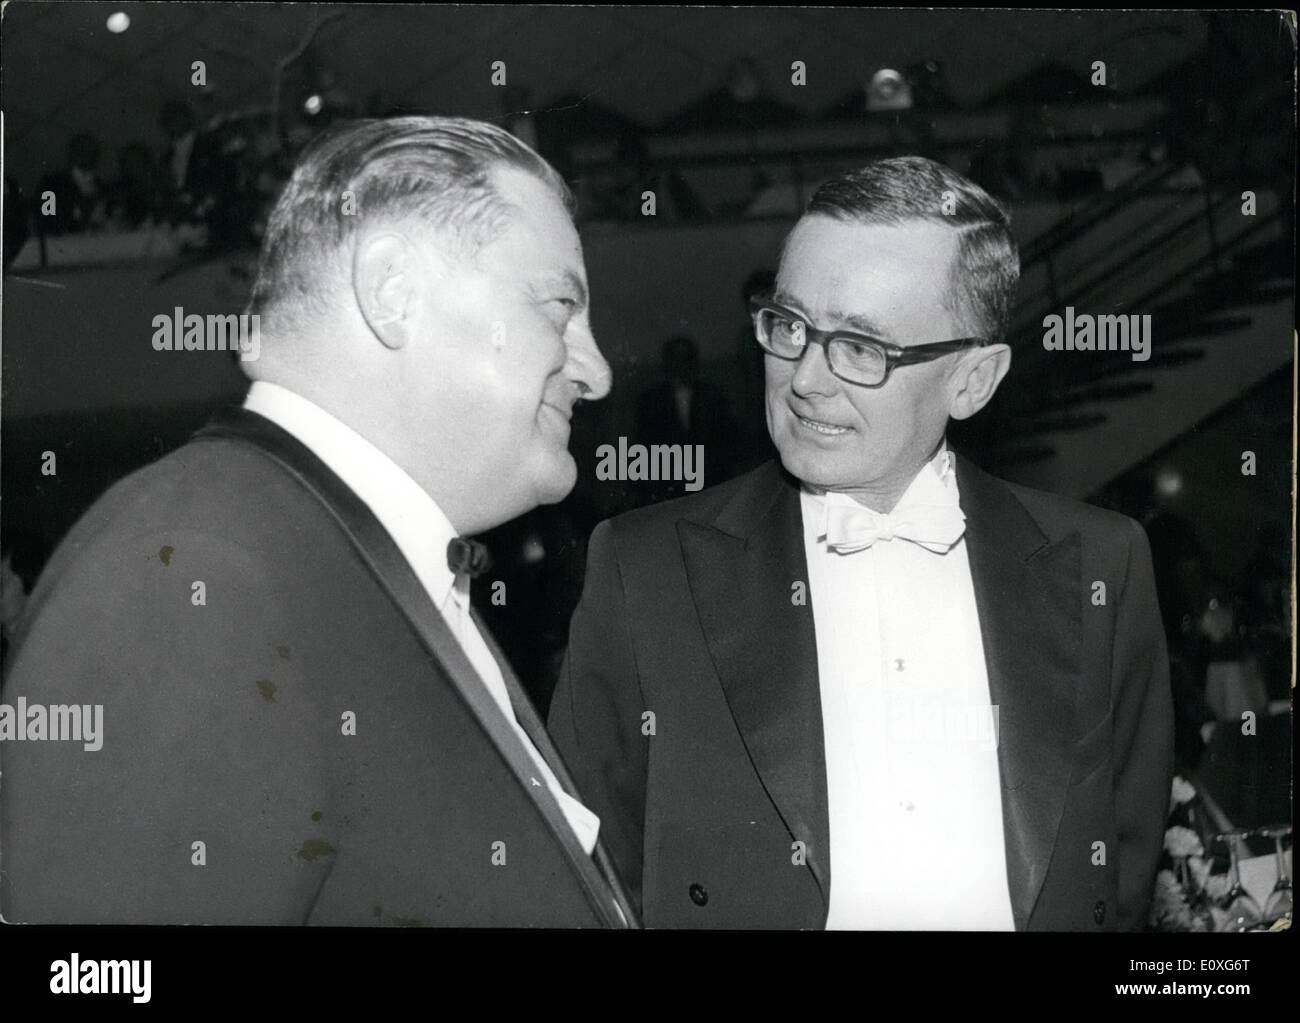 Nov. 11, 1966 - ''Federal-Press-Party'' in the Bonn Beethoven Hall On November 5th:  before had a ''Federal-Press-Party'' been filled with such a kling political excitement like this one. They conversed, accused, had themselves seen, demonstratively shook useful , observed and watched each other. Photo Shows Schiller SPD (right) and Franz Josef Strauss CSU (left) Stock Photo